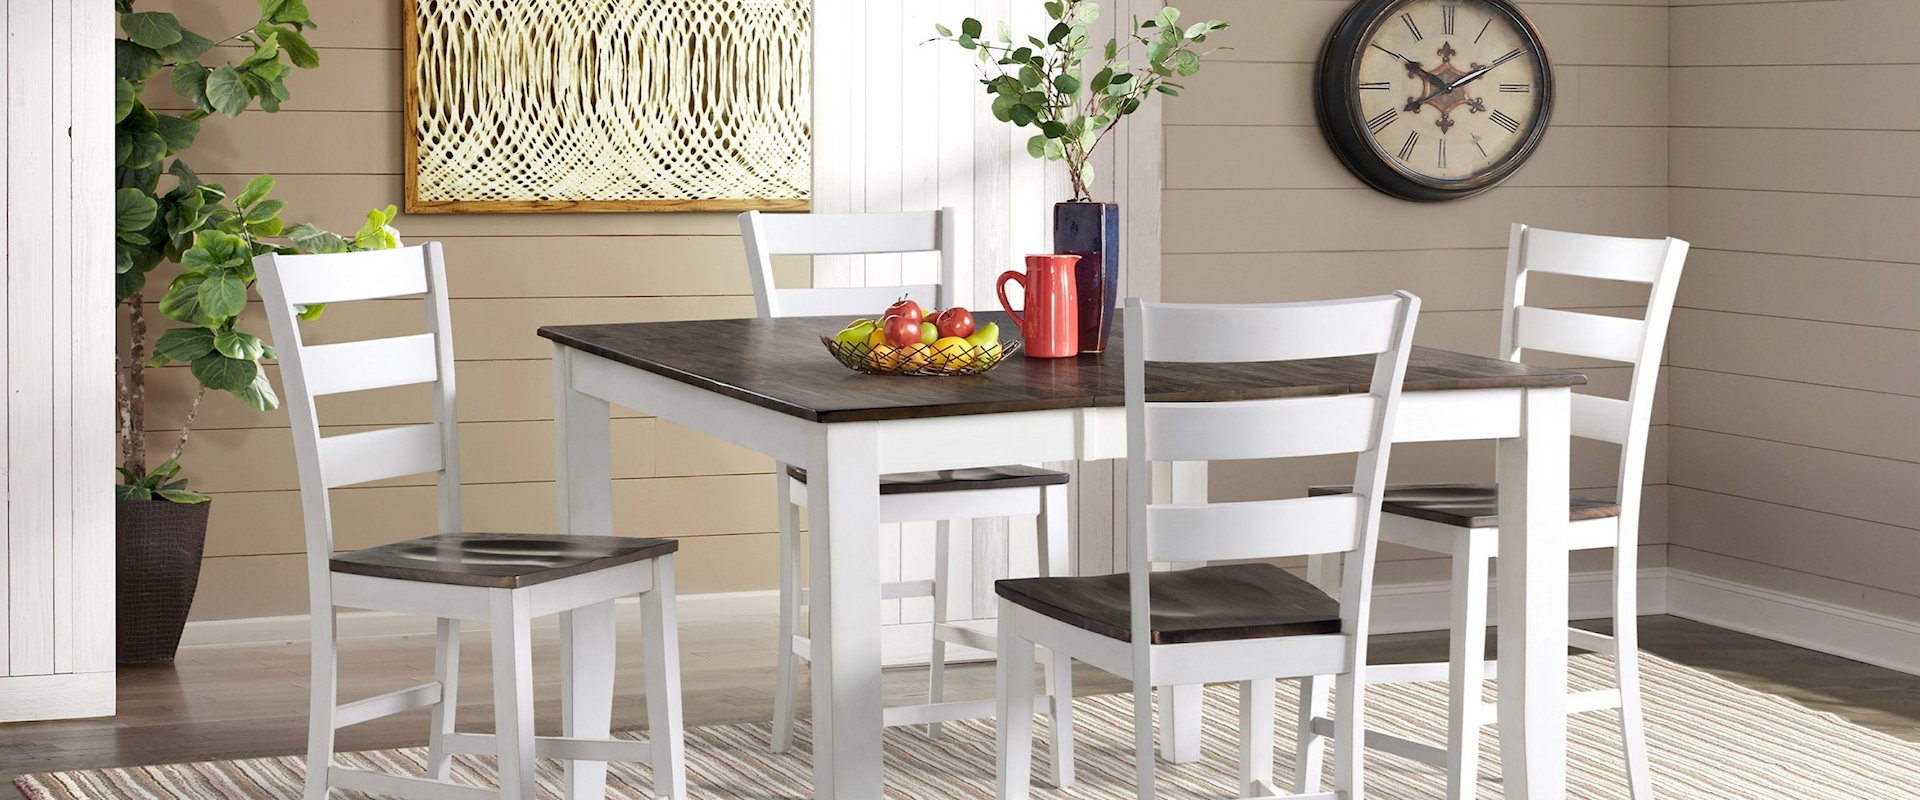 Transitional 5-Piece Pub Table and Chair Set